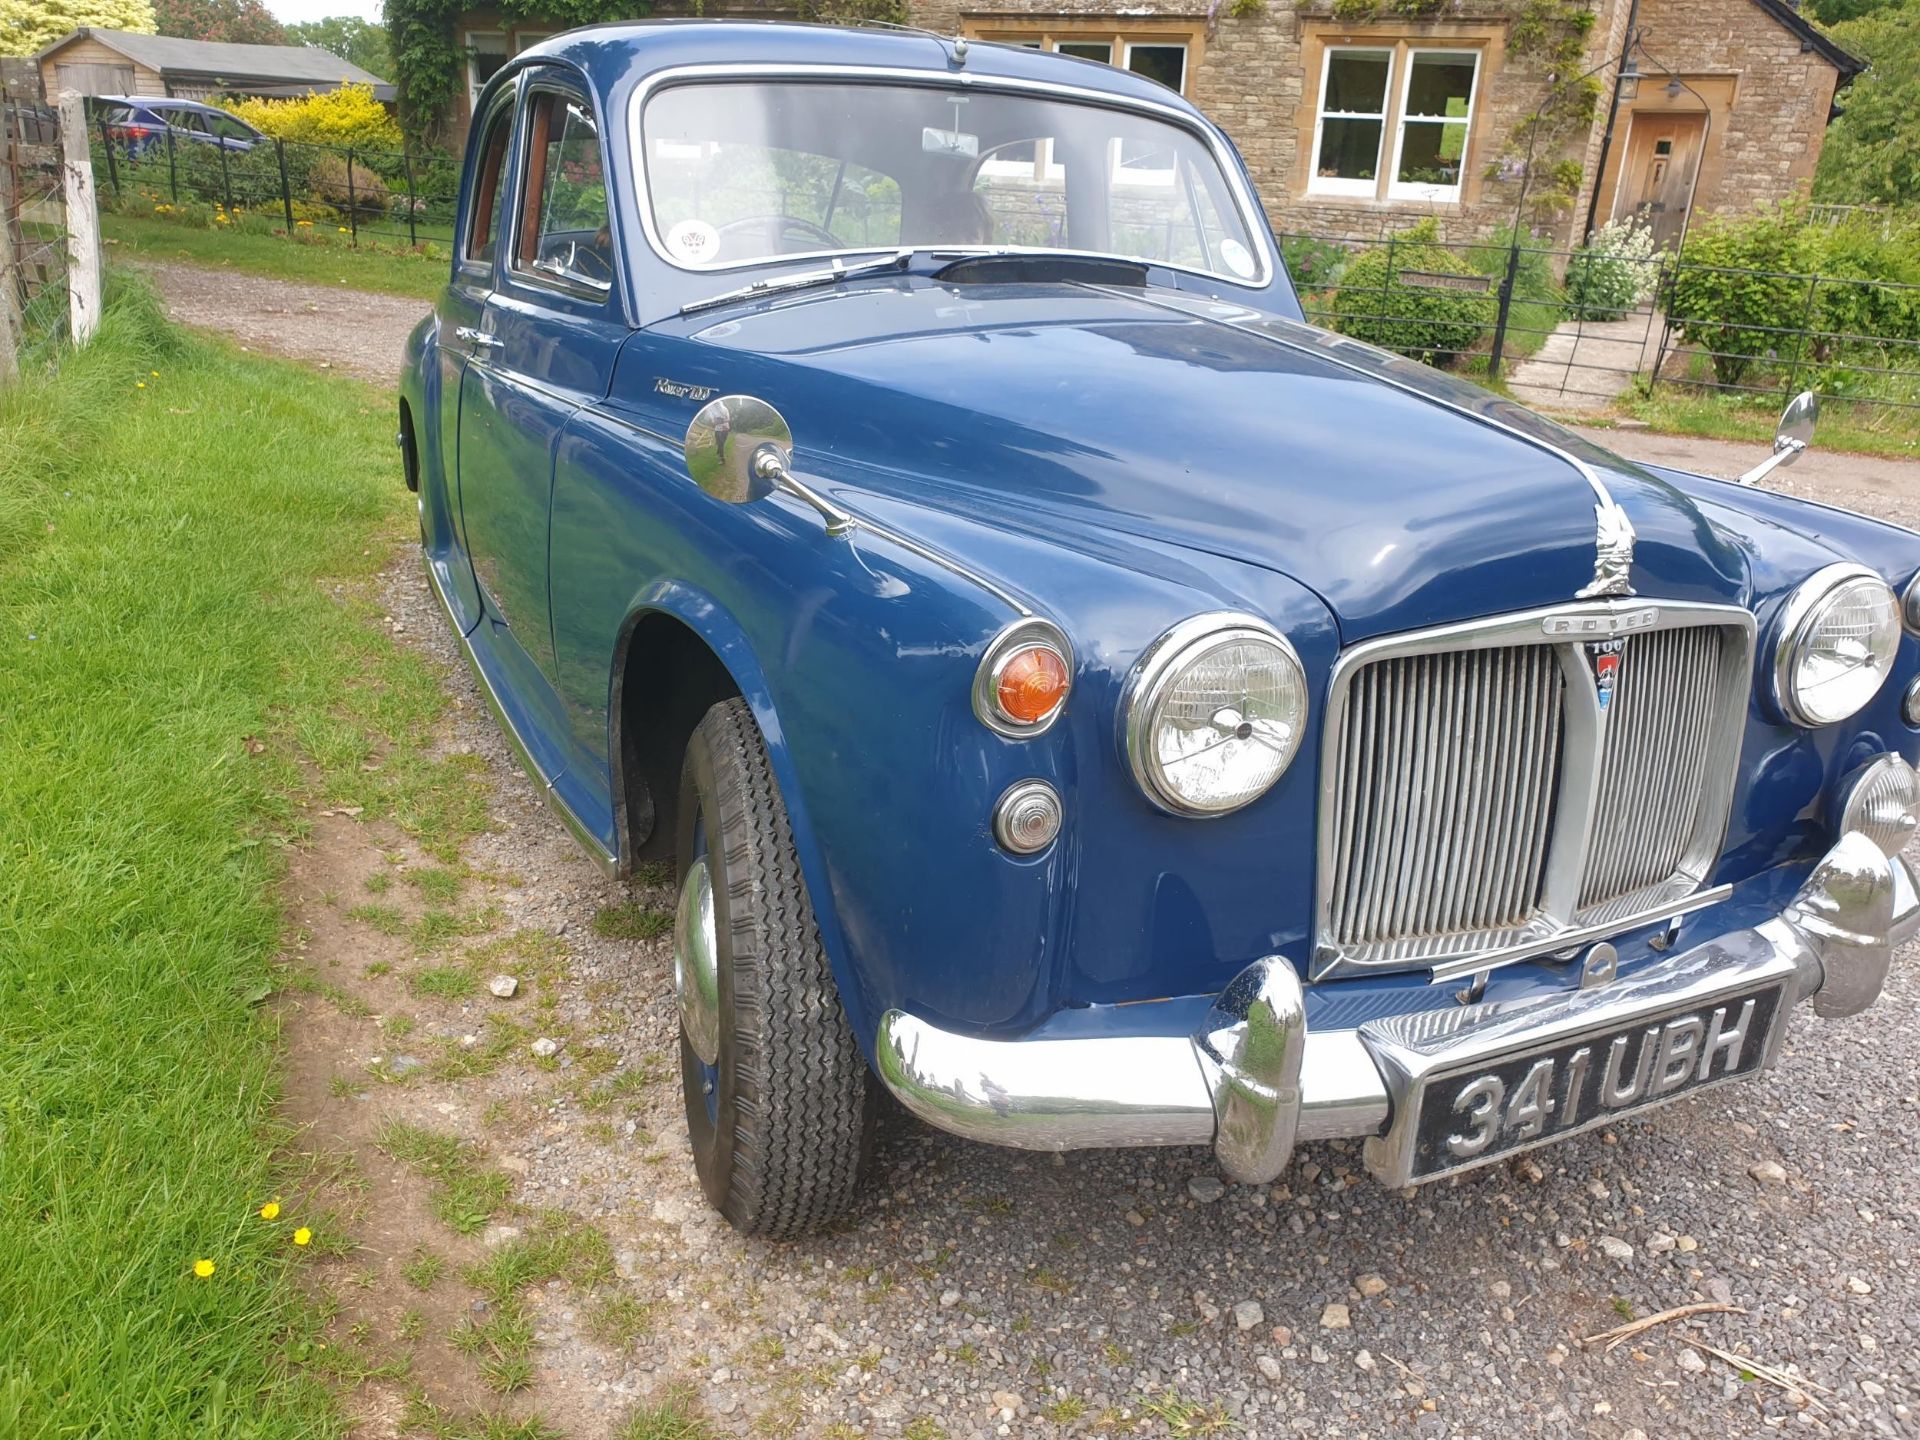 1961 Rover 100 P4 Registration number 341 UBH Blue with blue leather interior The clutch and gearbox - Image 4 of 11